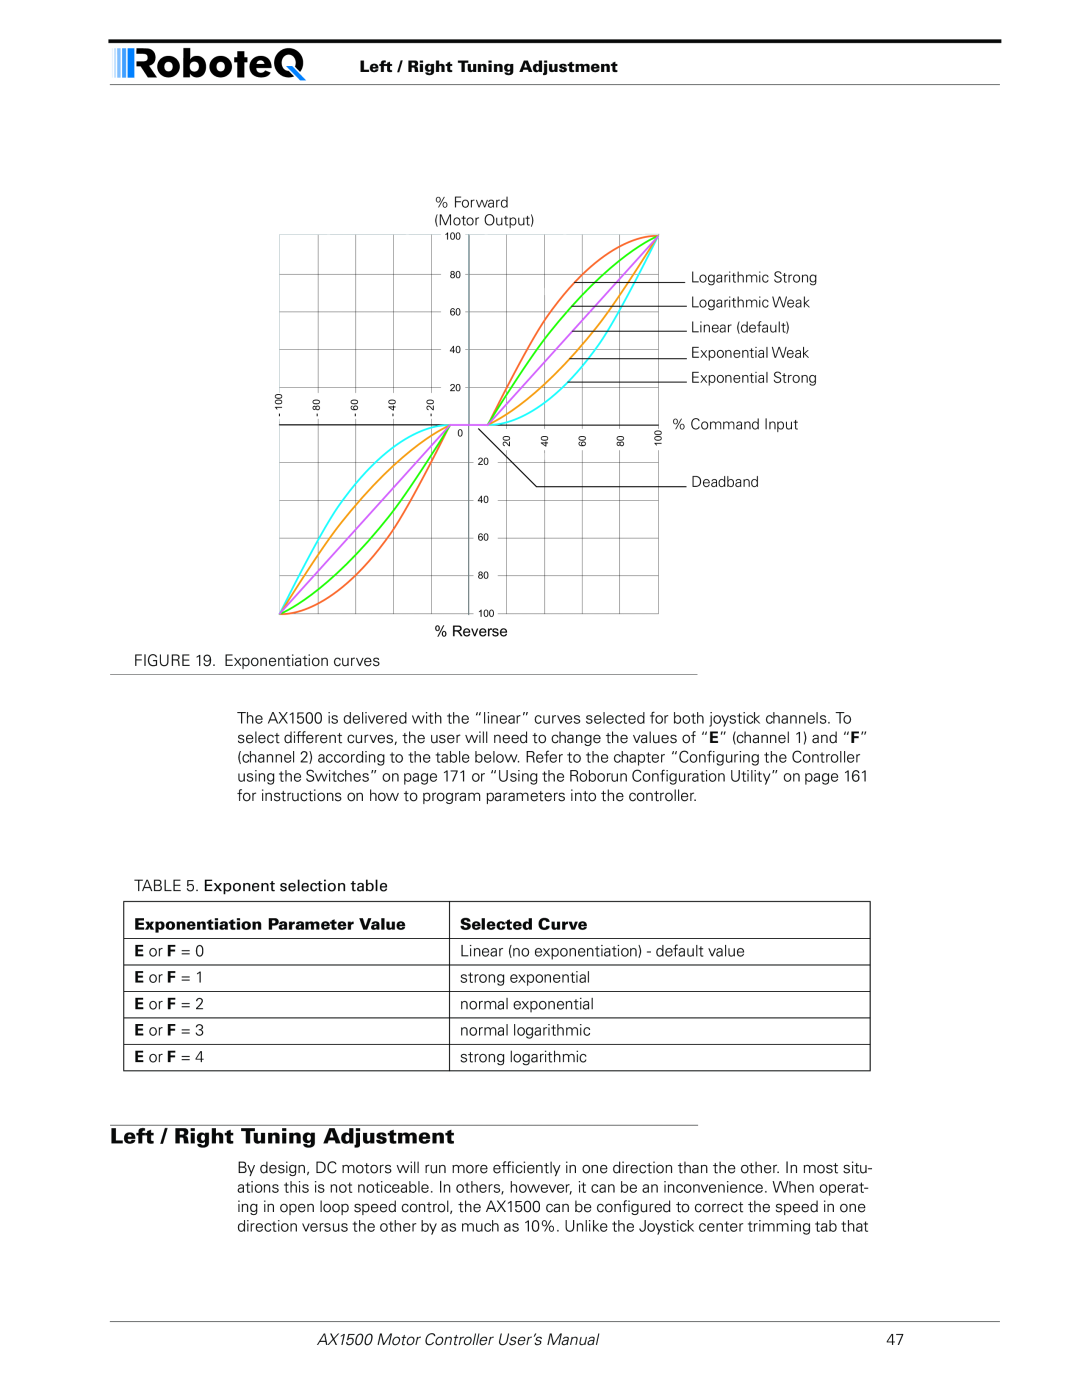 RoboteQ AX1500, AX2550 user manual Left / Right Tuning Adjustment, Exponentiation Parameter Value, Selected Curve 